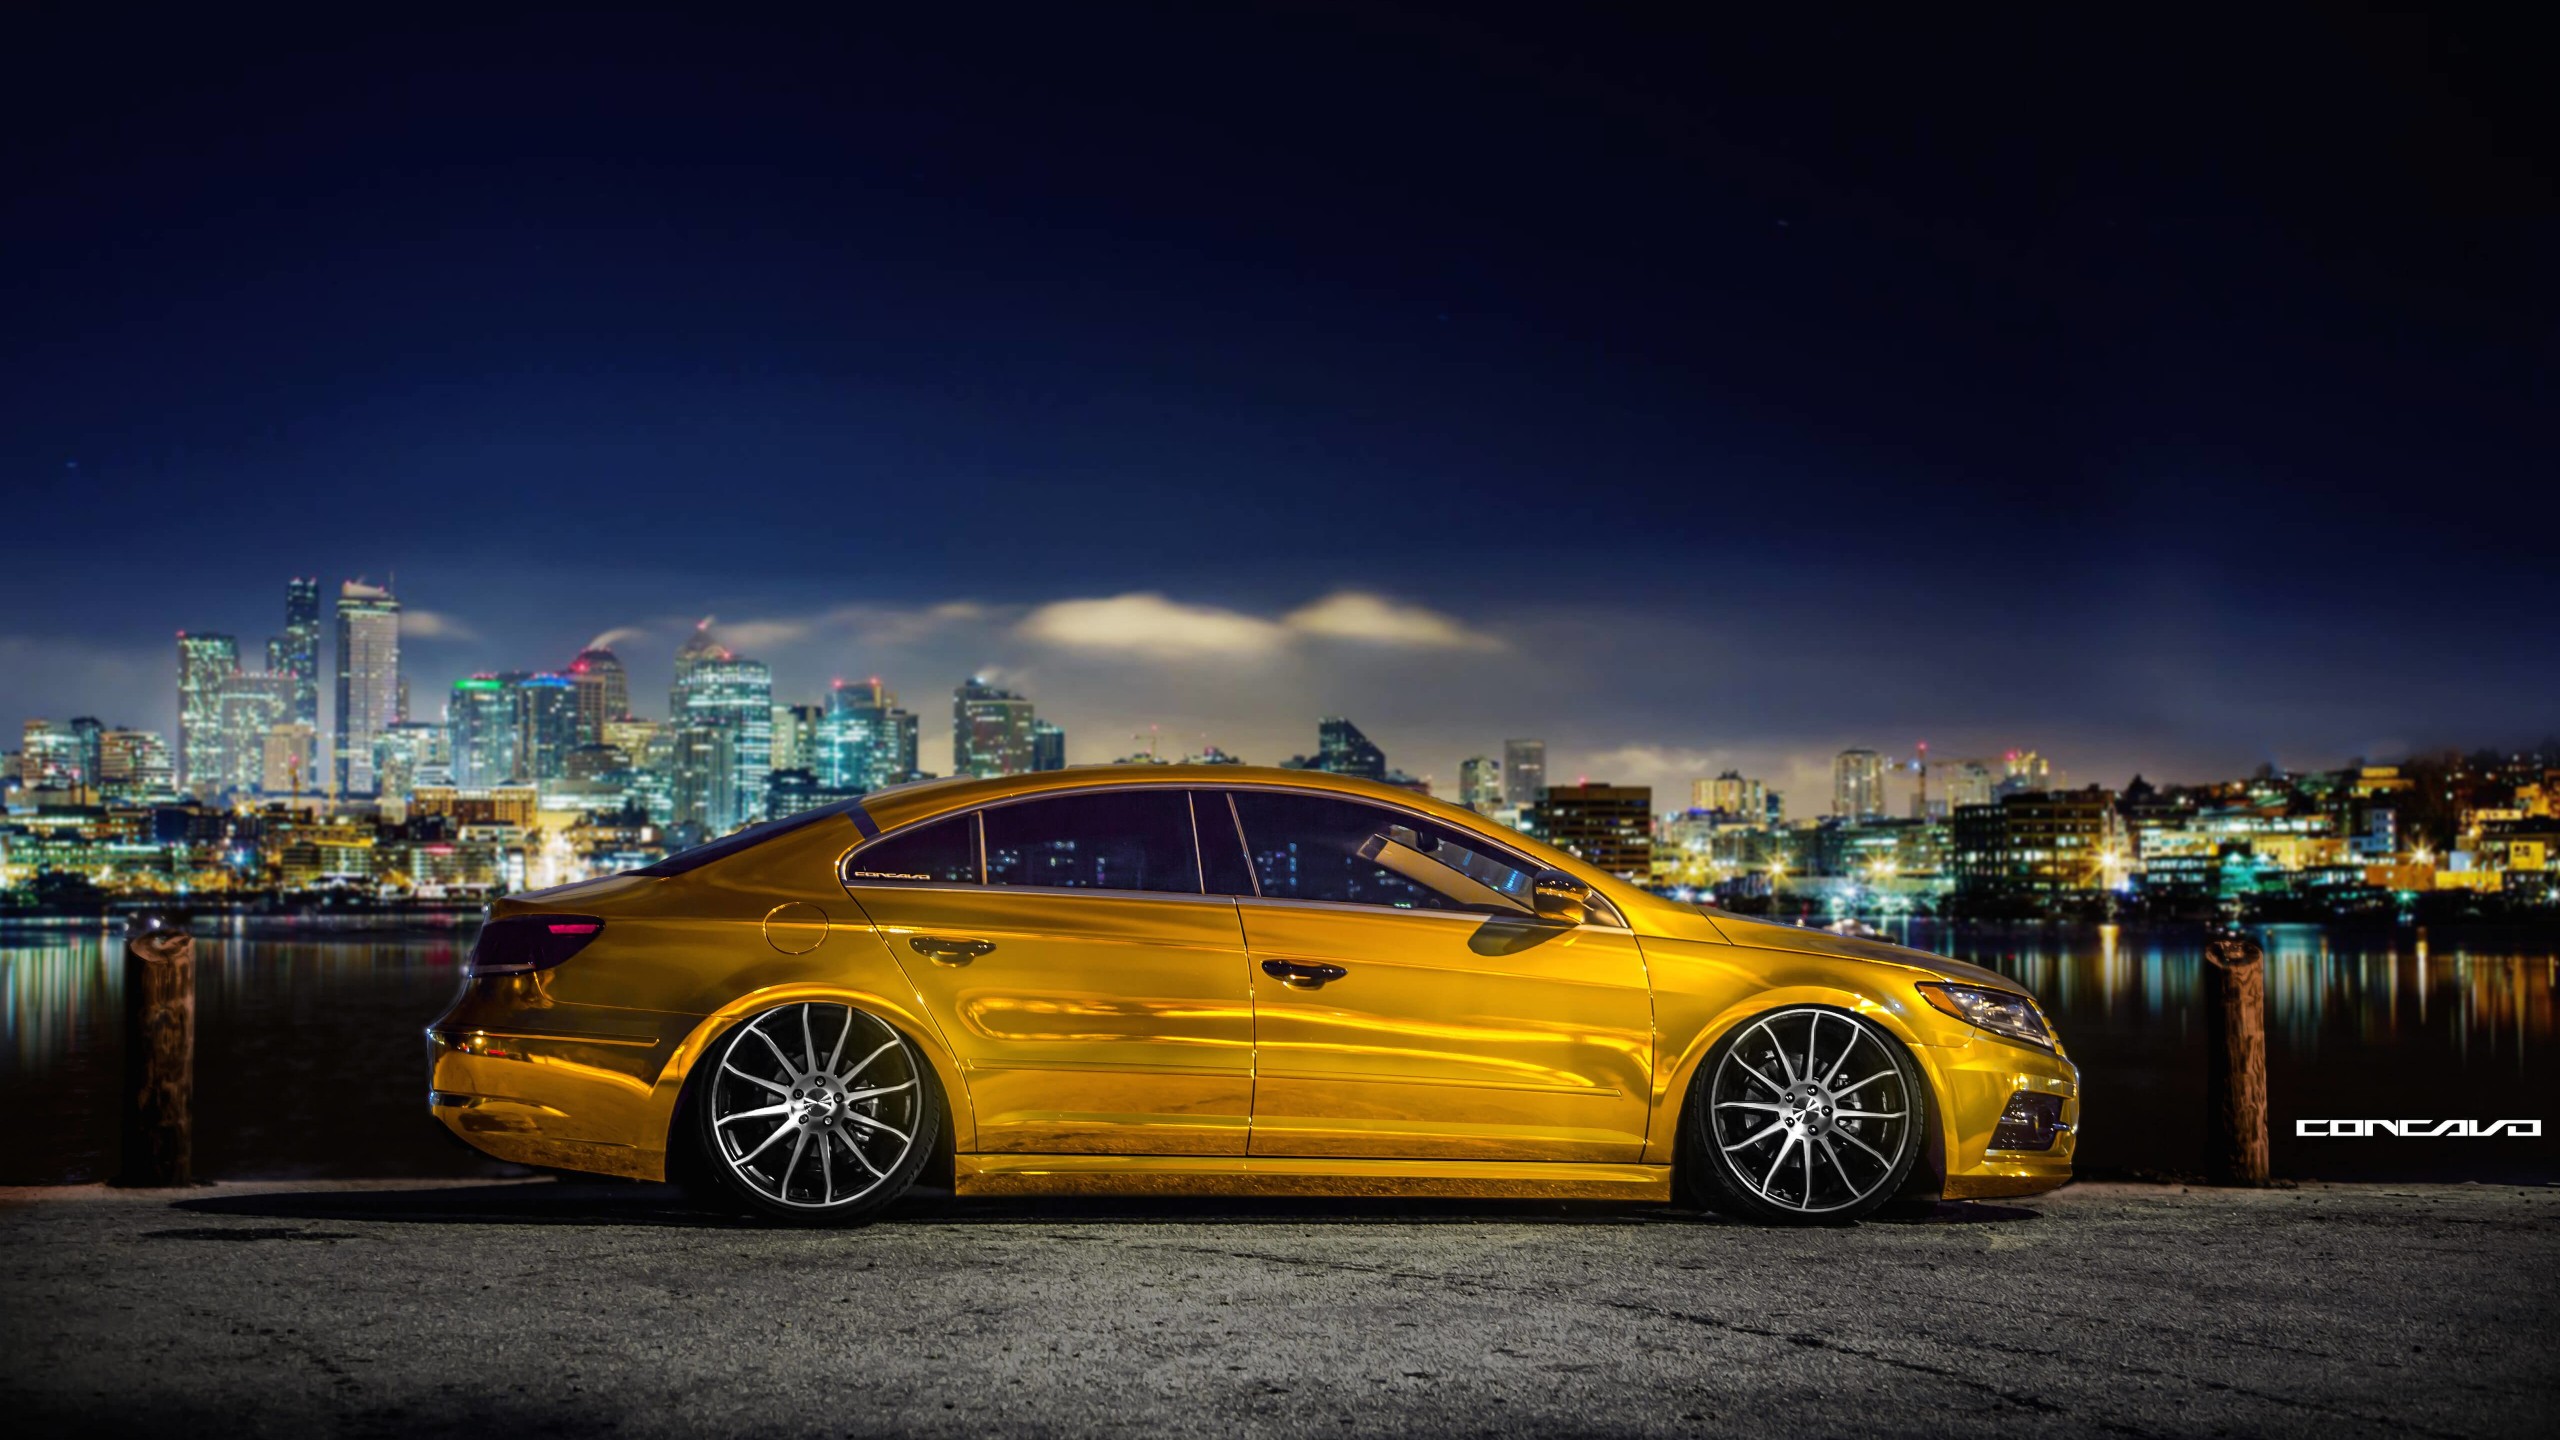 Volkswagen CC on CW-12 Concave Wheels Wallpaper for Social Media YouTube Channel Art